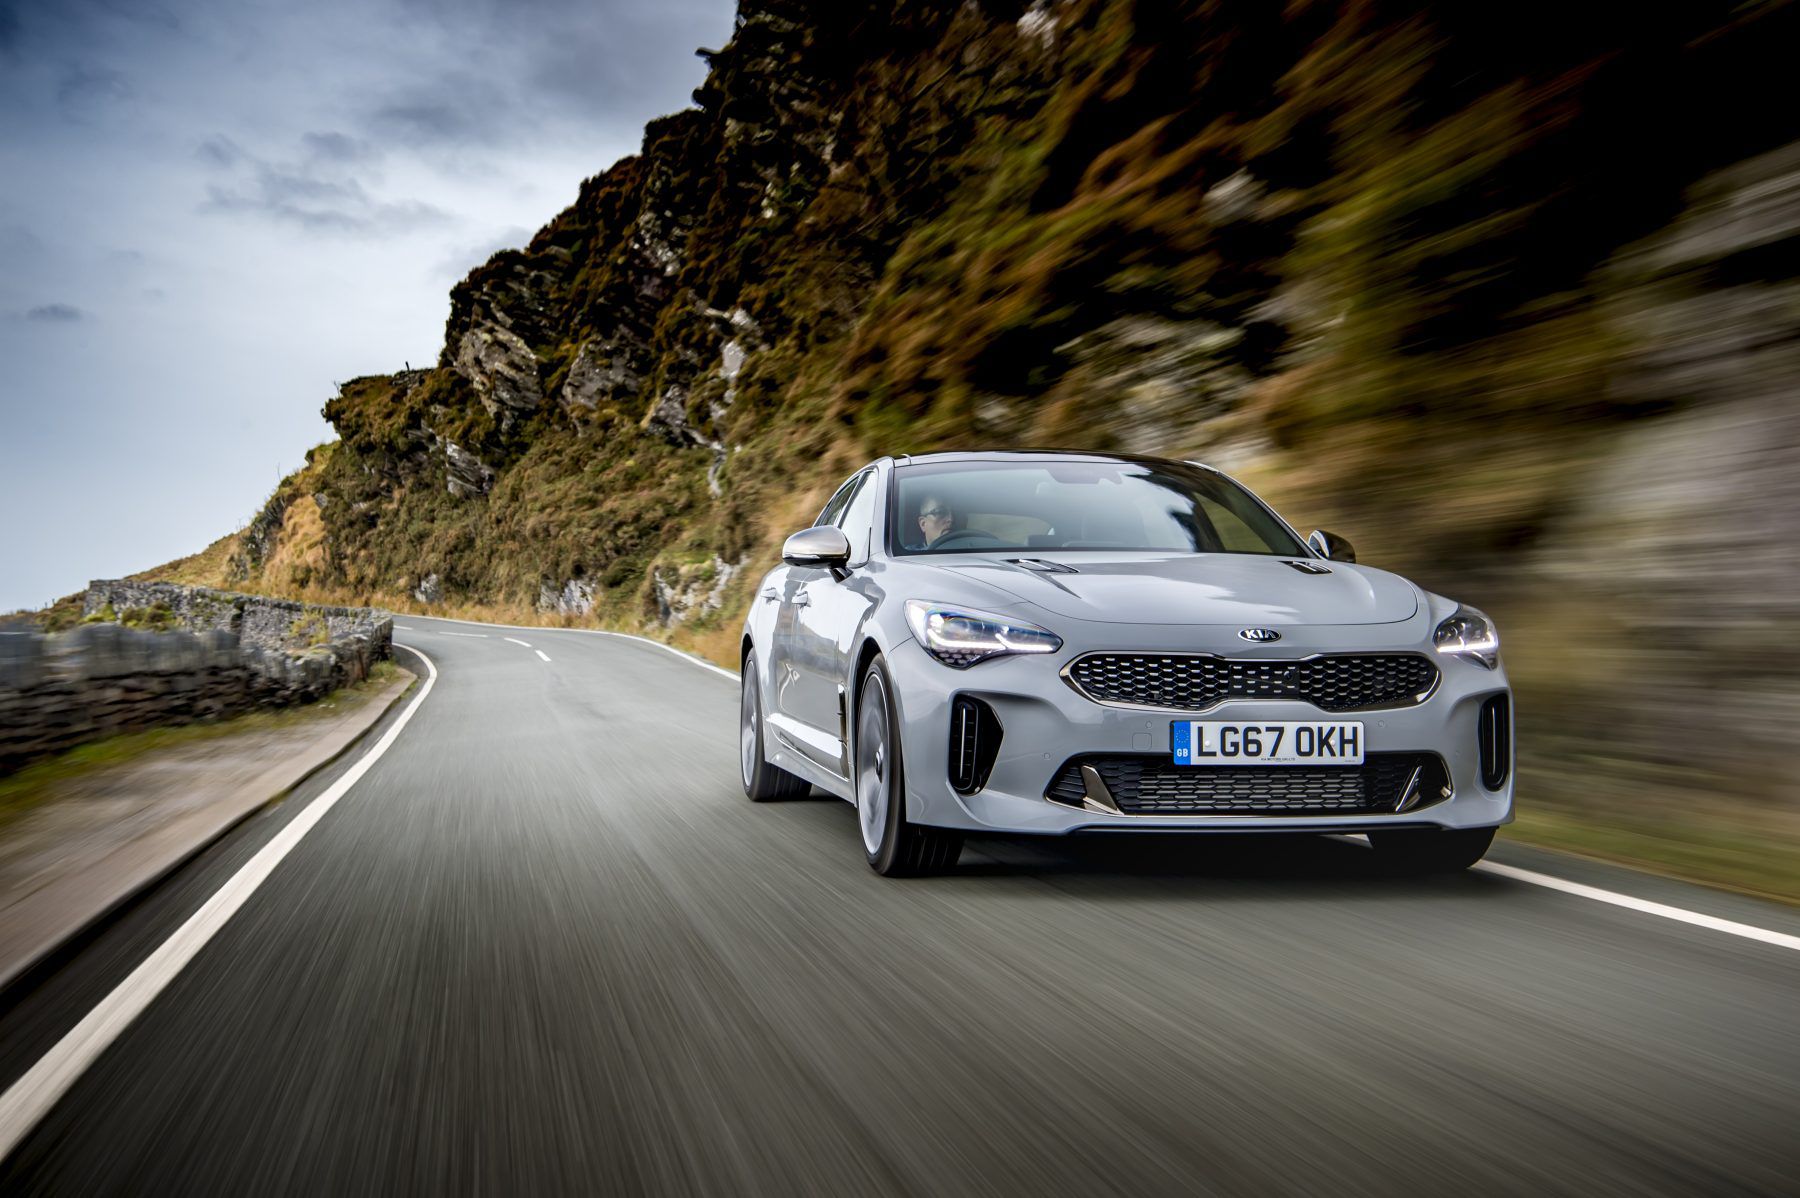 Front view of a Kia Stinger driving down the road